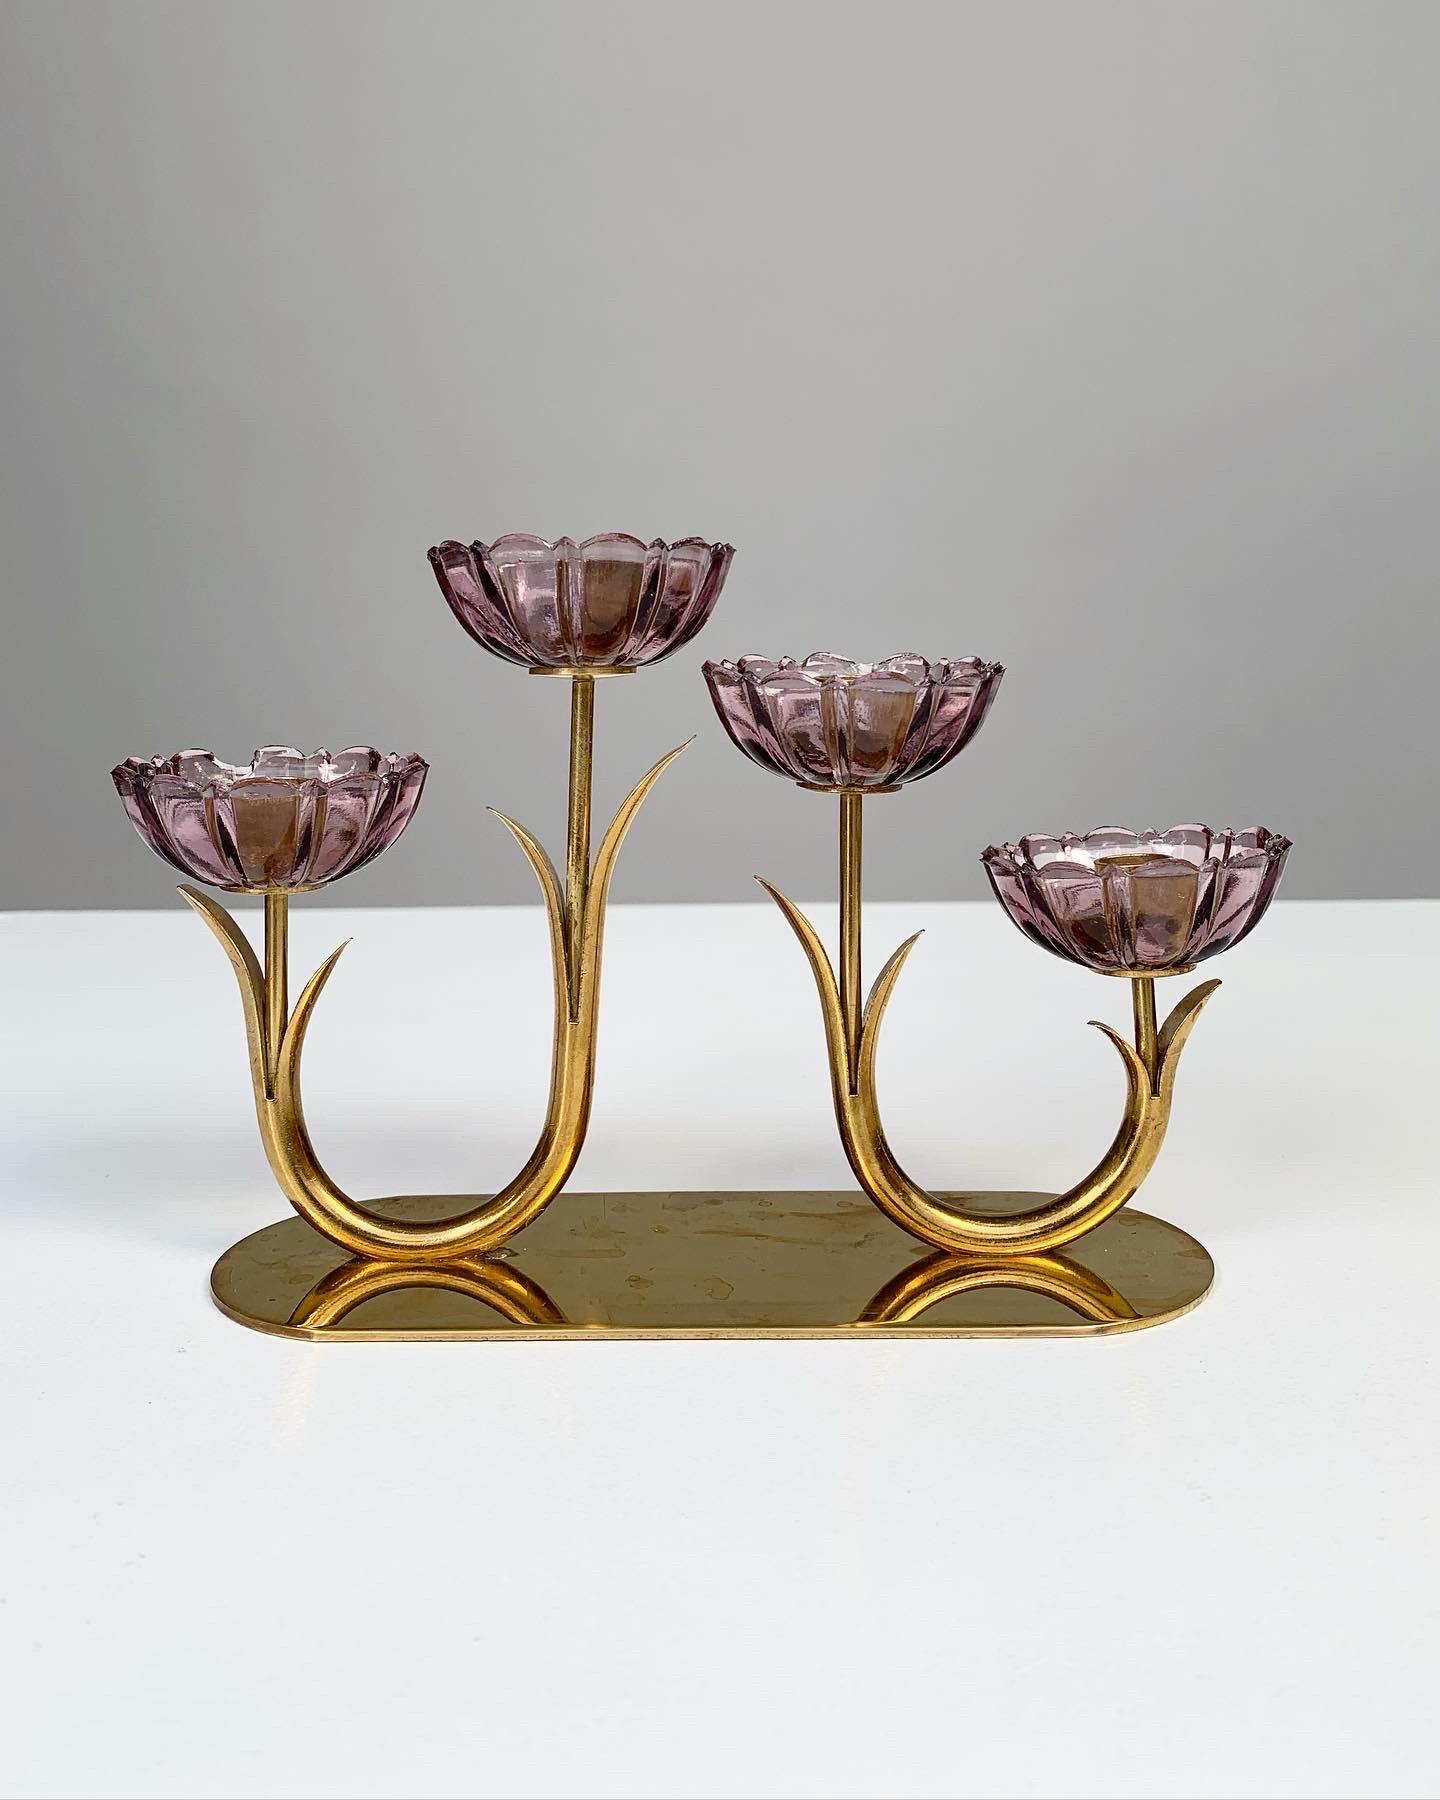 Flower candelabra designed by Gunnar Ander for Ystad-Metall in Sweden, 1950s.

Made of solid brass with lilac pressed glass flowers, marked „made in Sweden“.

Width: 18 cm
Depth: 6.5 cm
Height: 13 cm
For candles with a diameter of